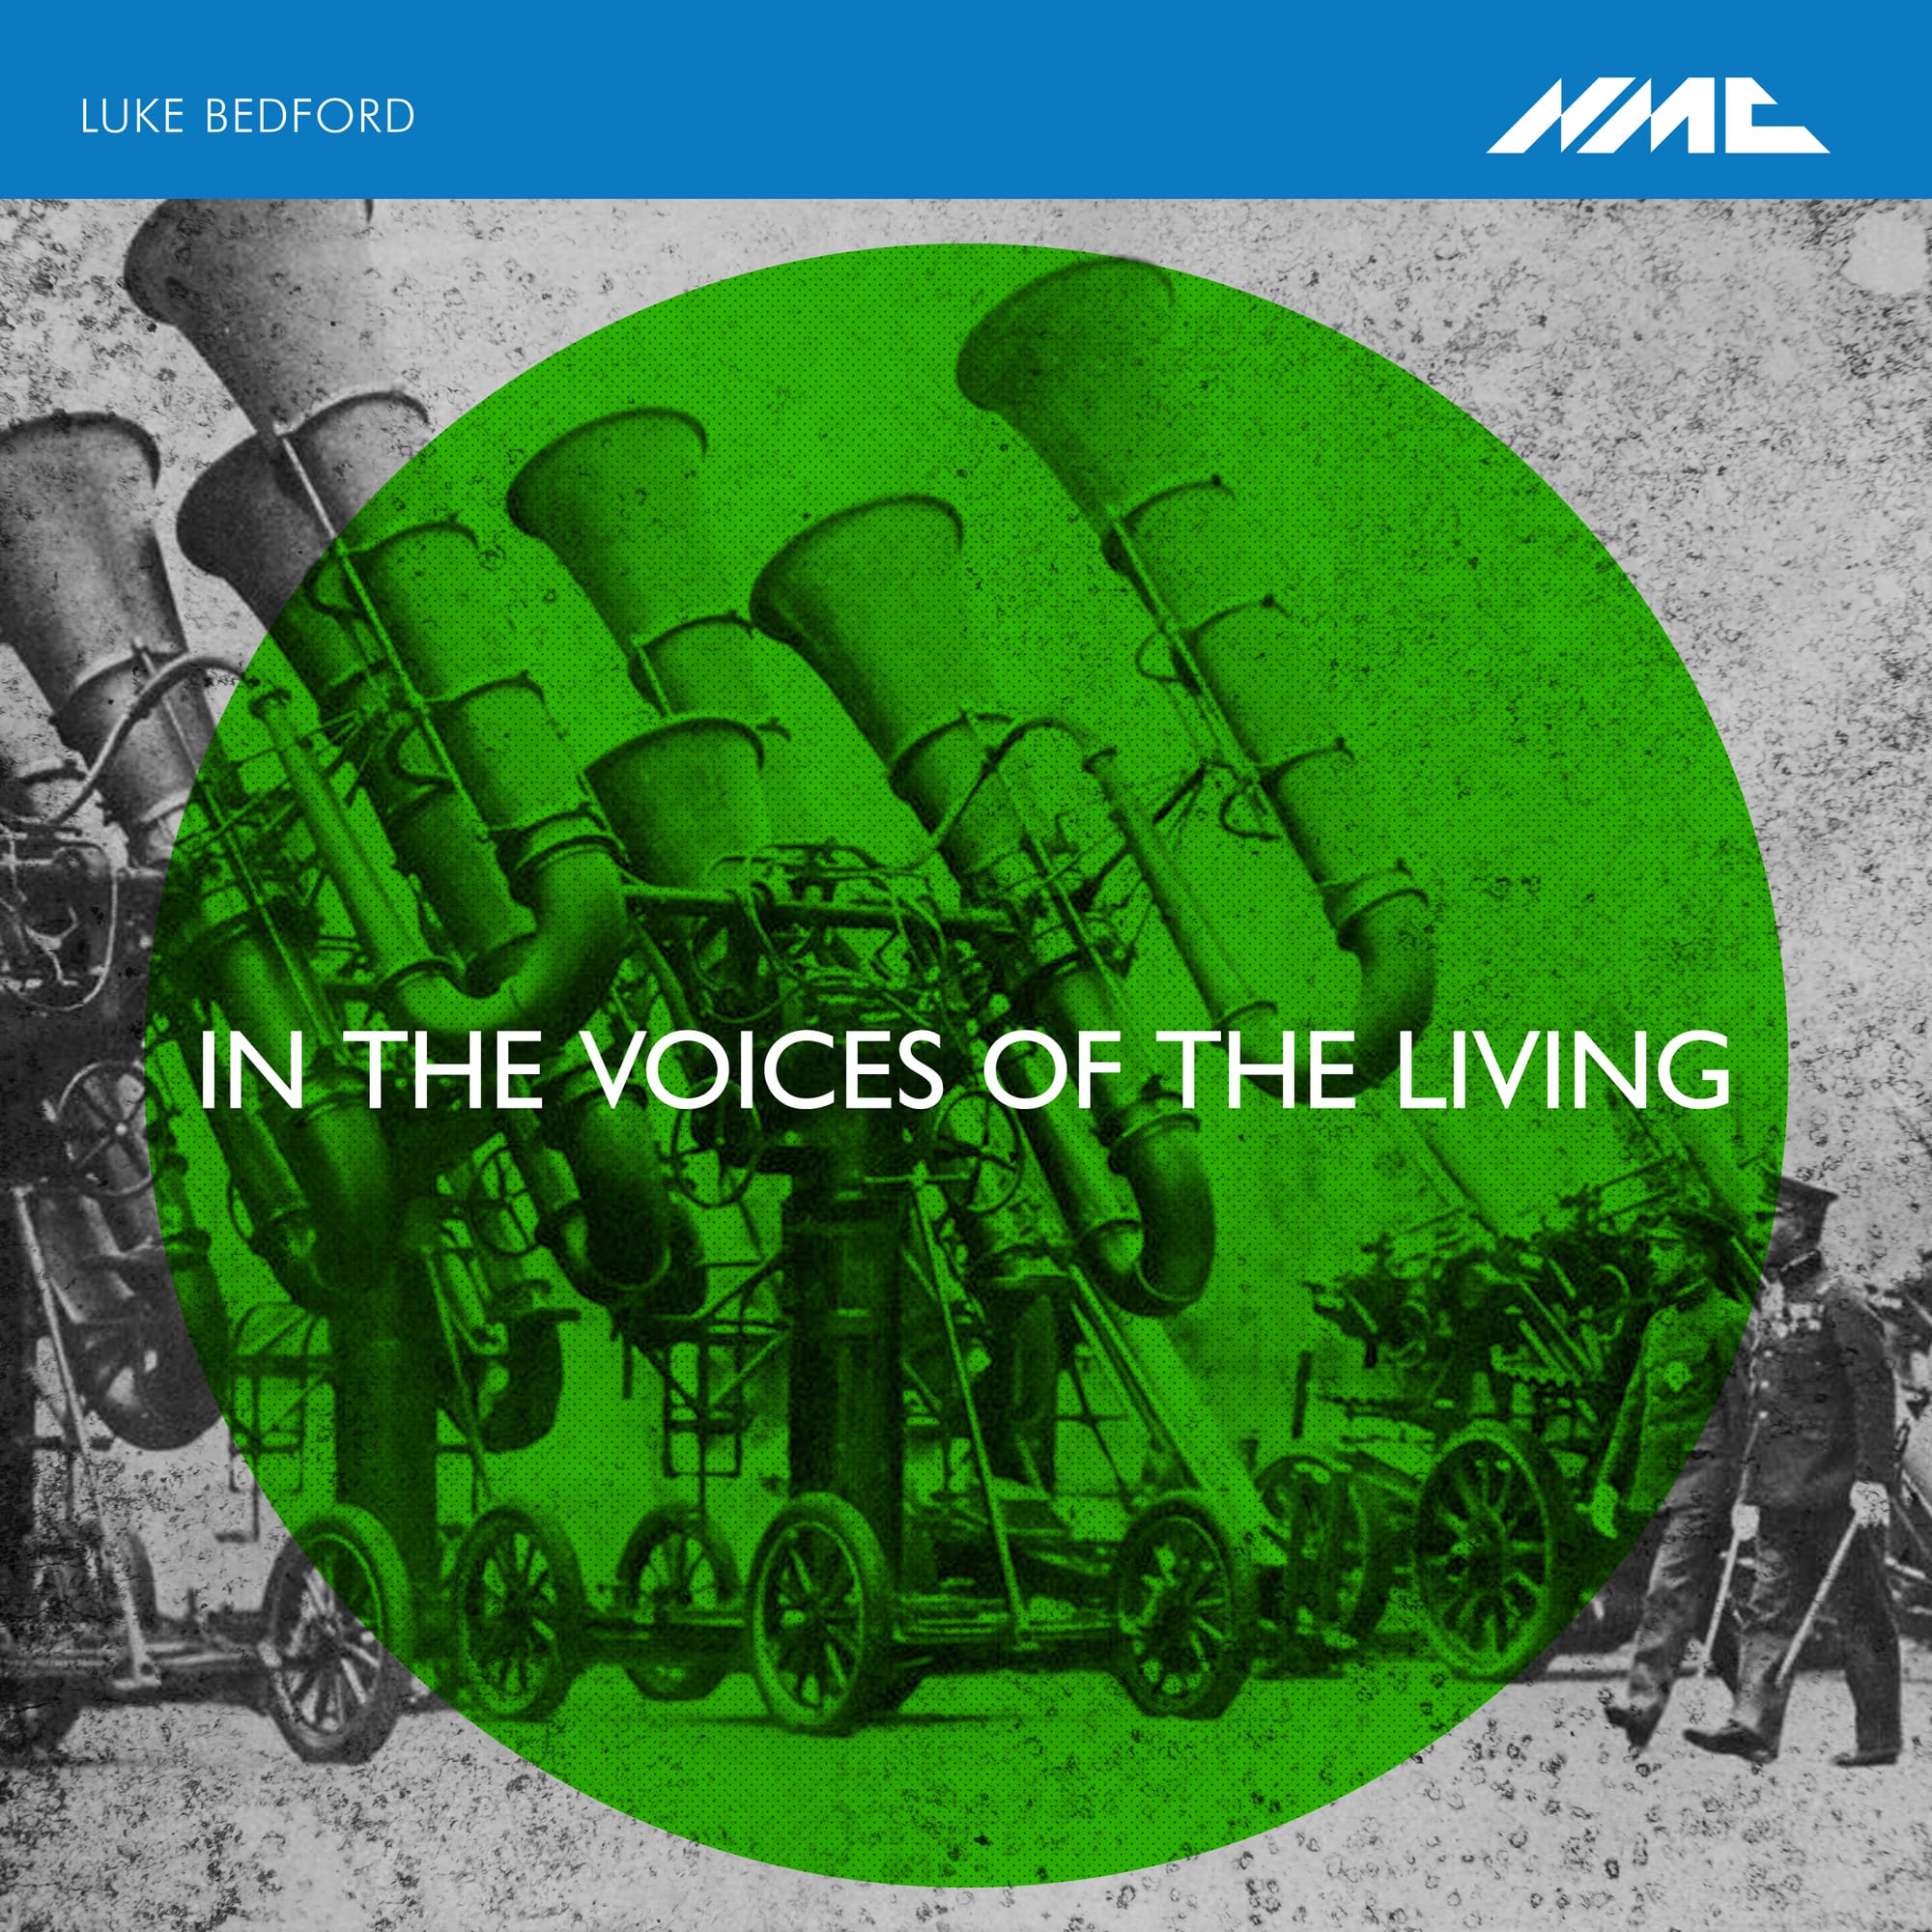 Luke Bedford: In the Voices of the Living